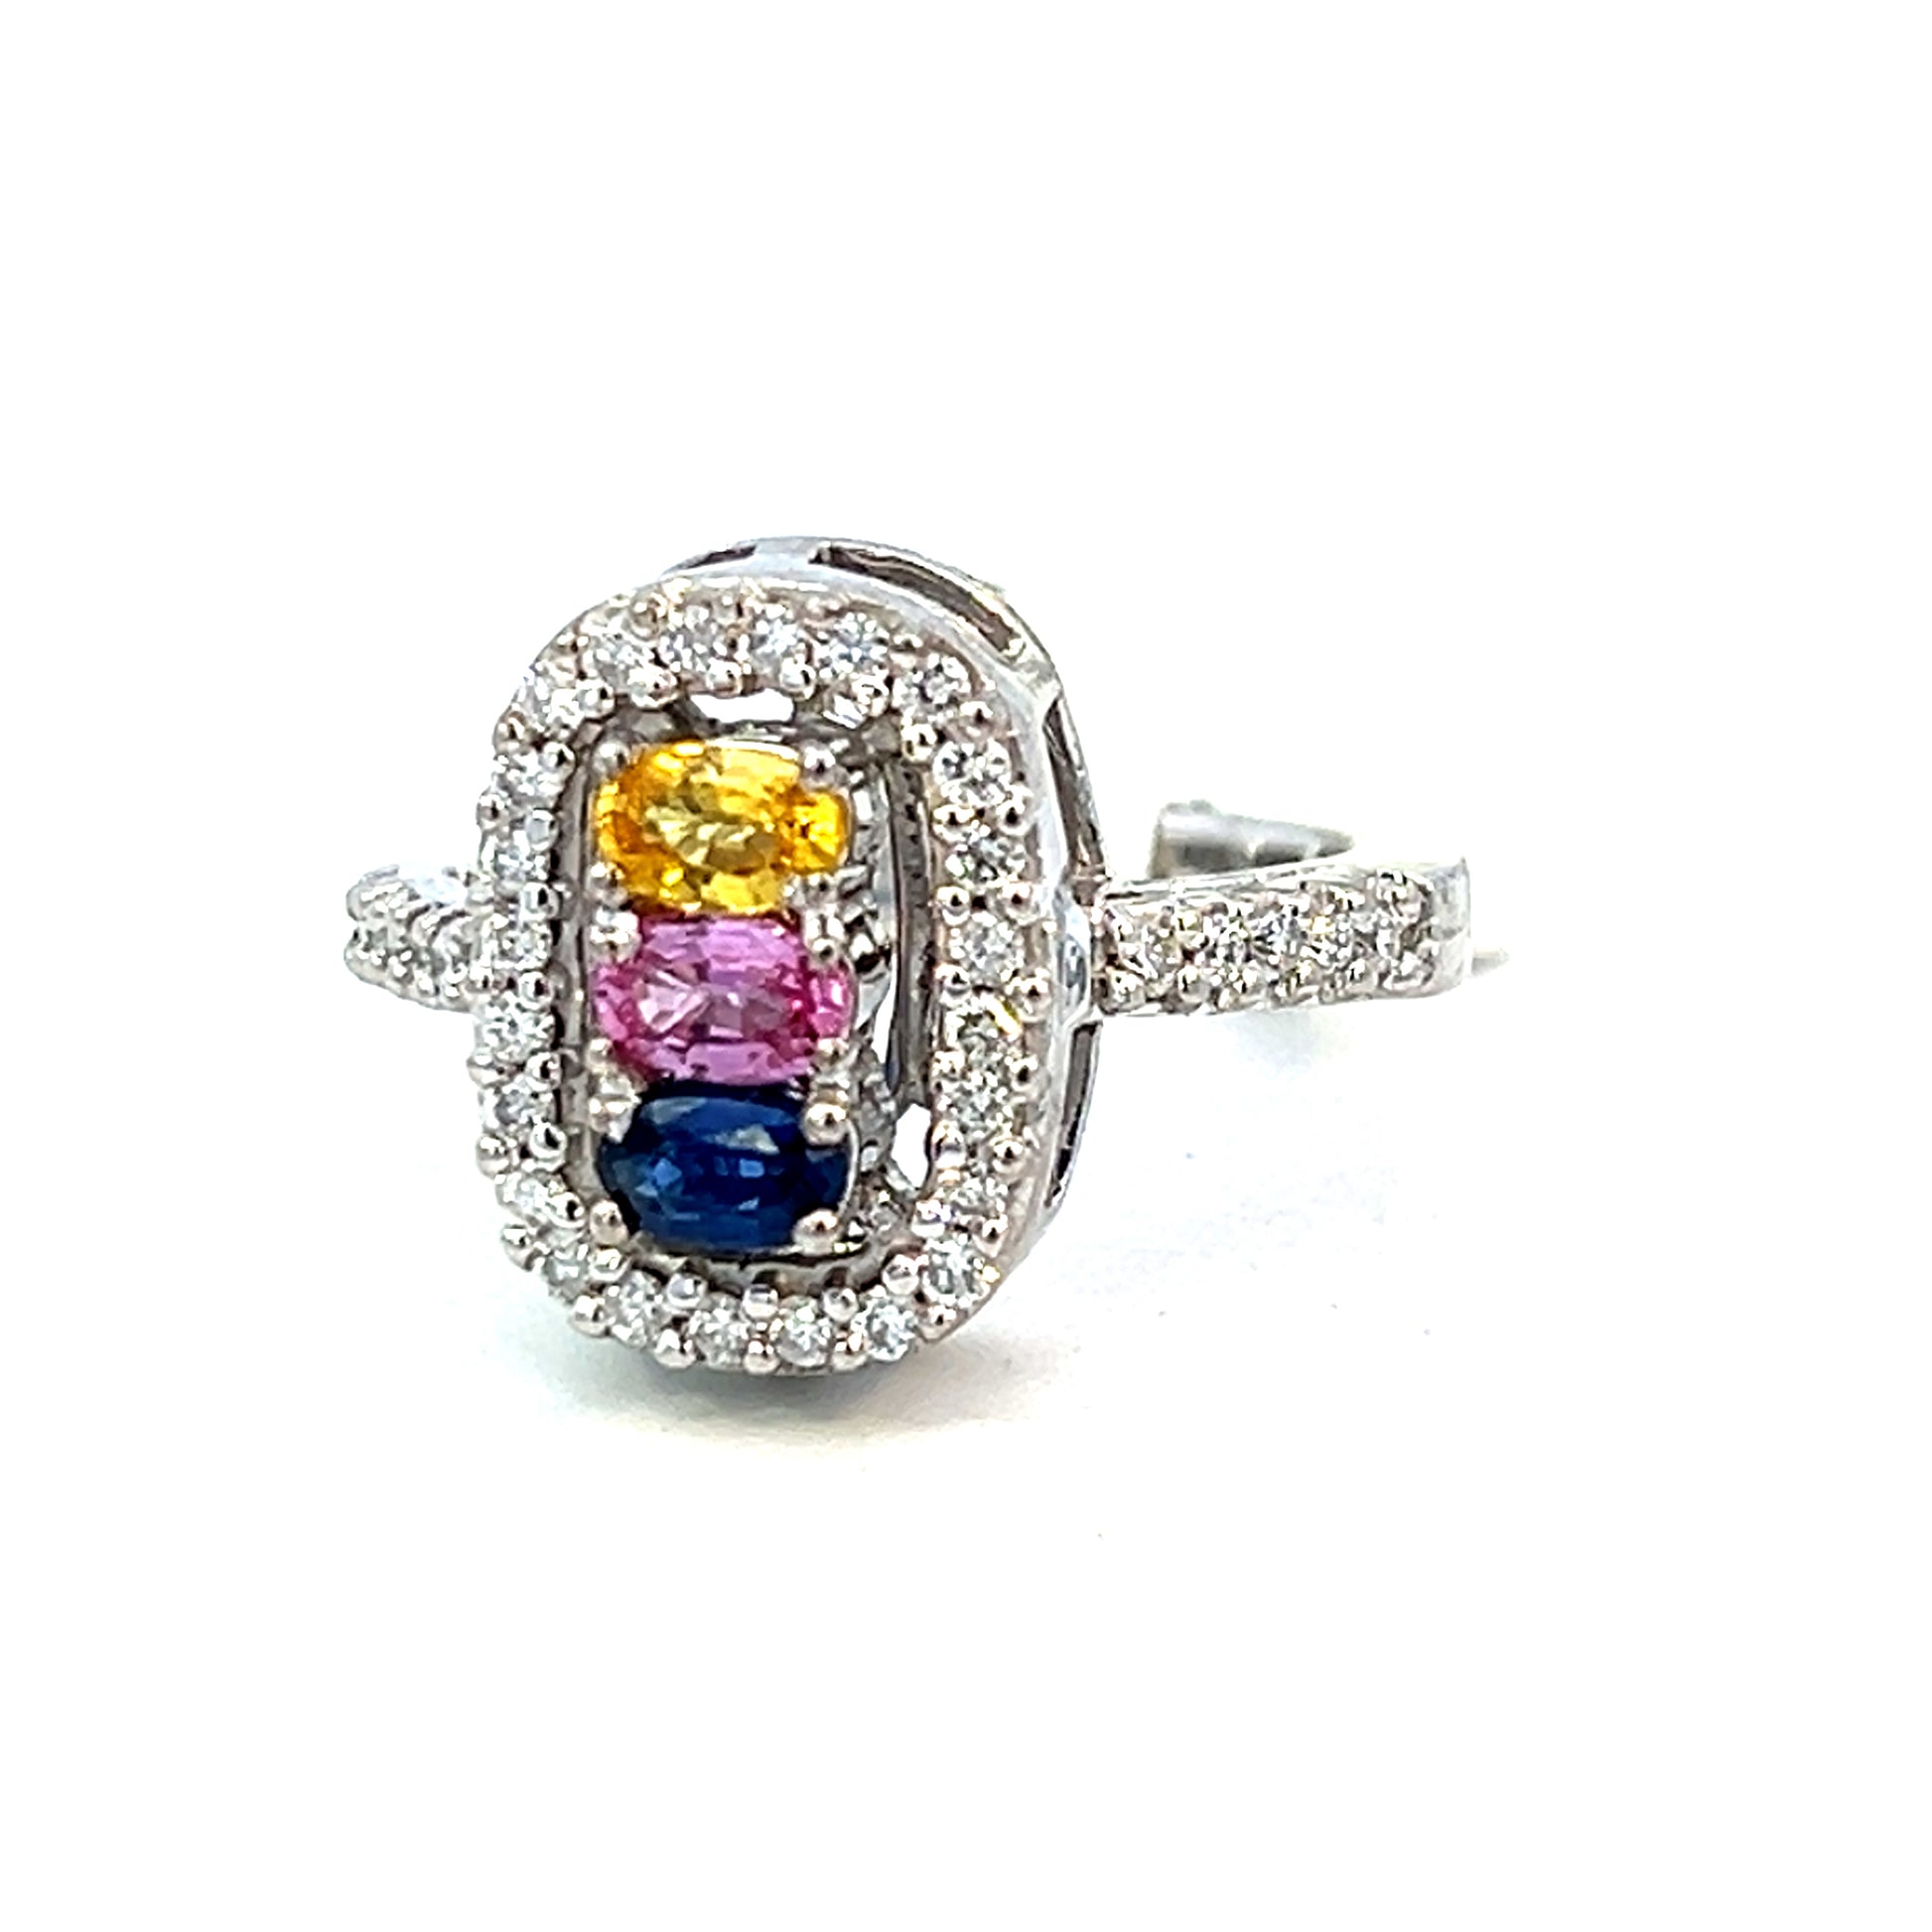 1.34cttw Sapphire and Diamond Ring | Multi Color Gemstone Ring | 14k Gold